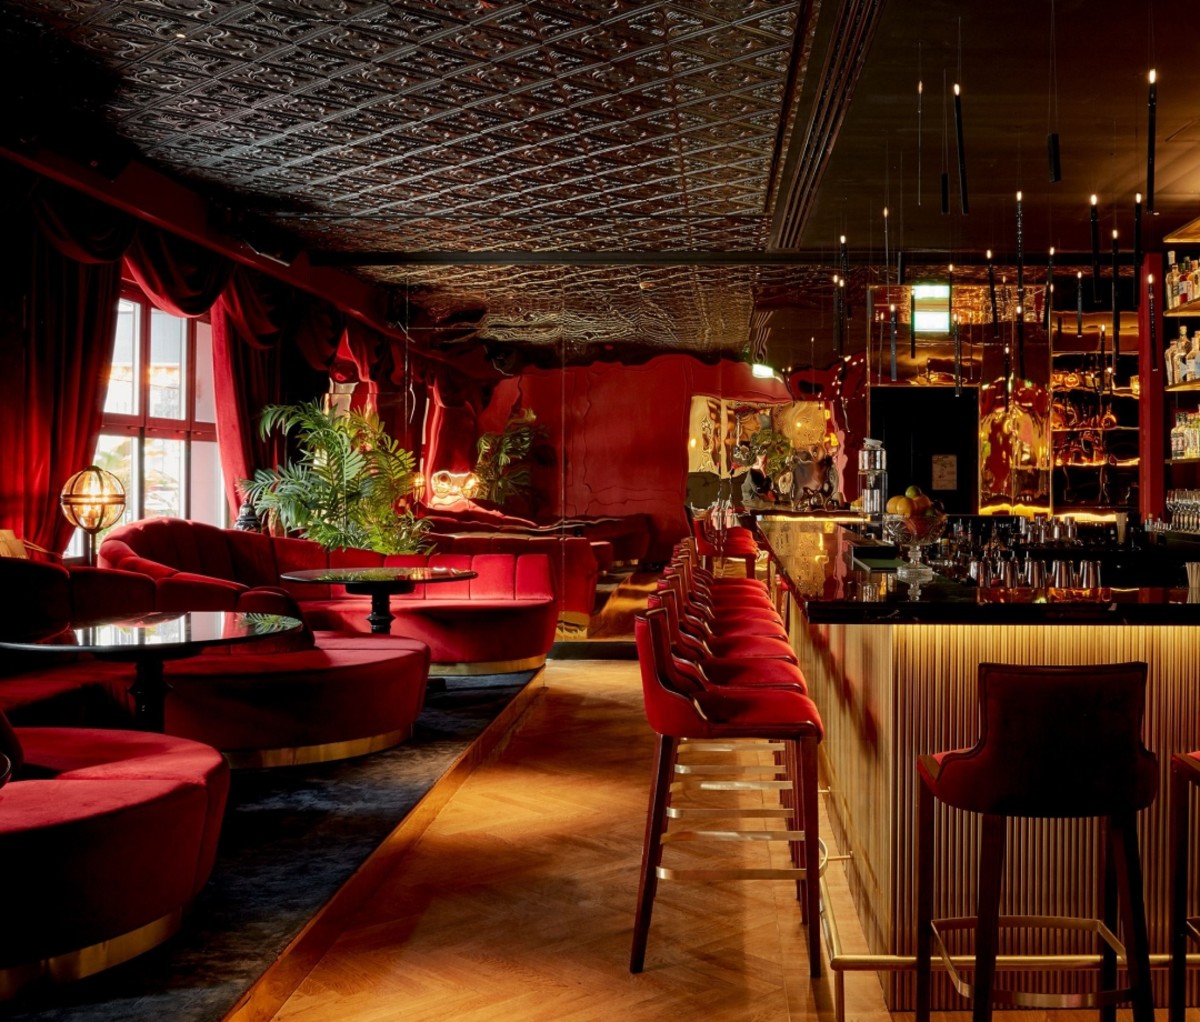 Provocateur Hotel in Berlin: red-accented bar with chairs and lounges